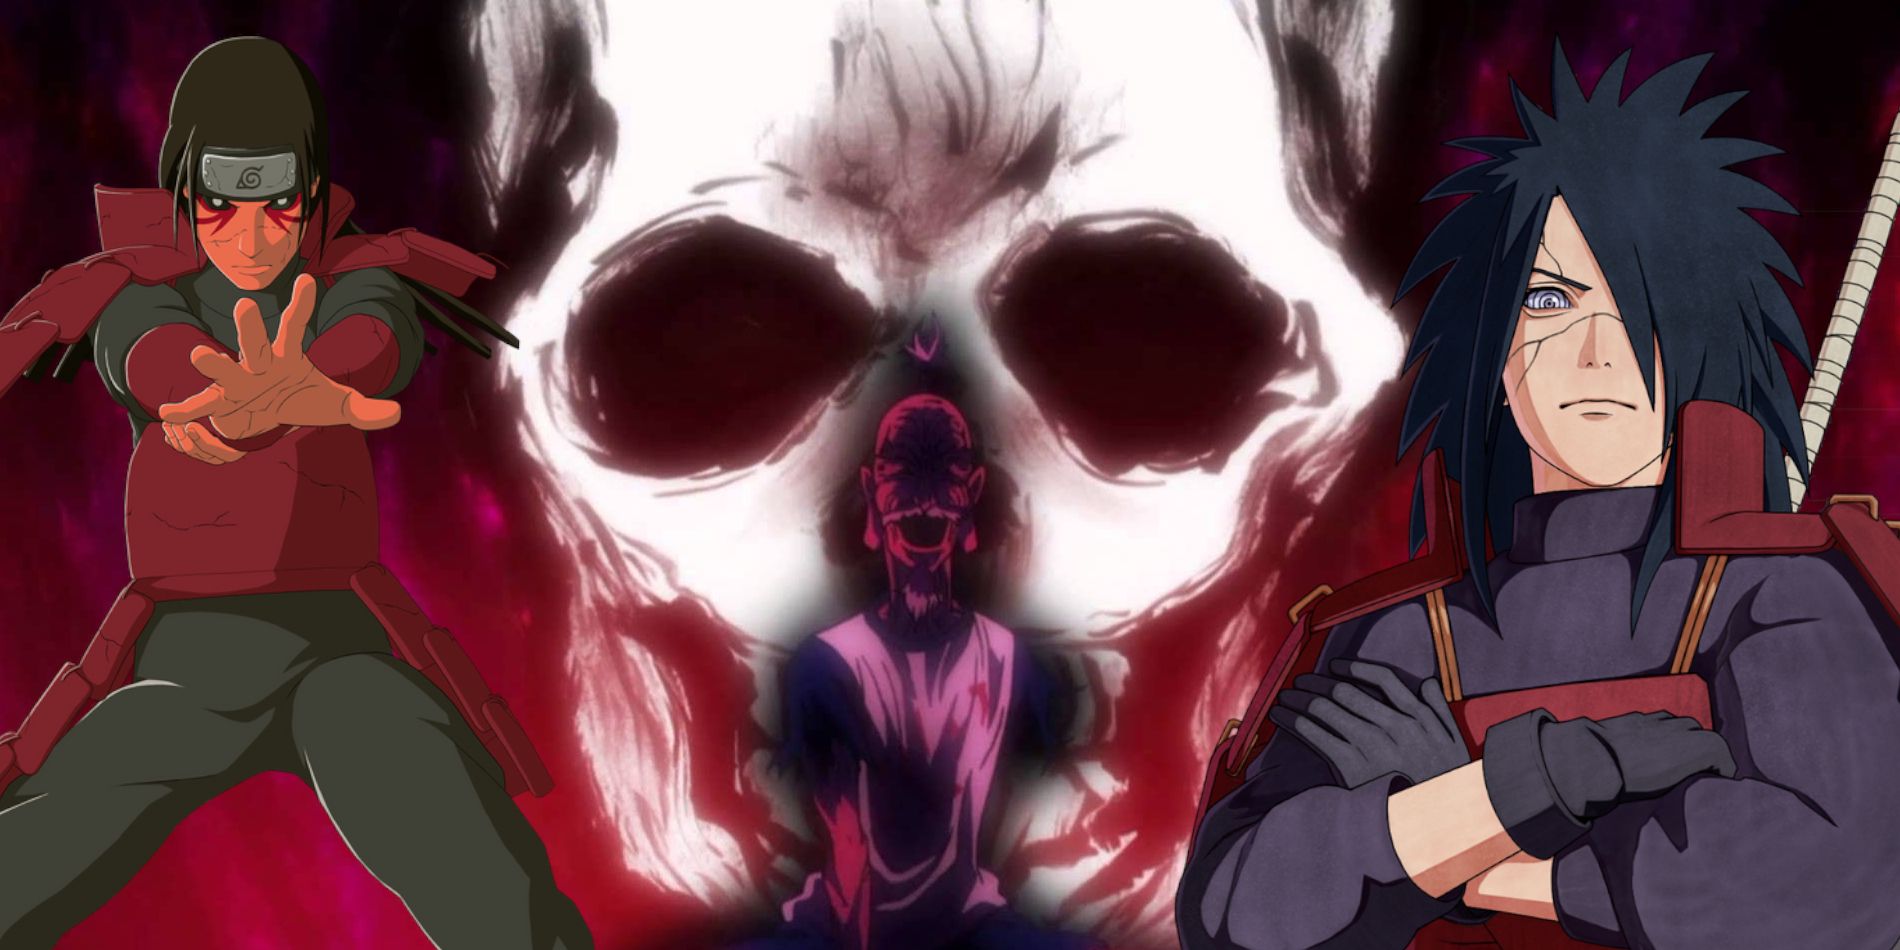 Naruto characters Madara and Hashirama stand in front of Hunter X Hunter's Netero who is missing an arm and smiling creepy with a large white skull behind him.